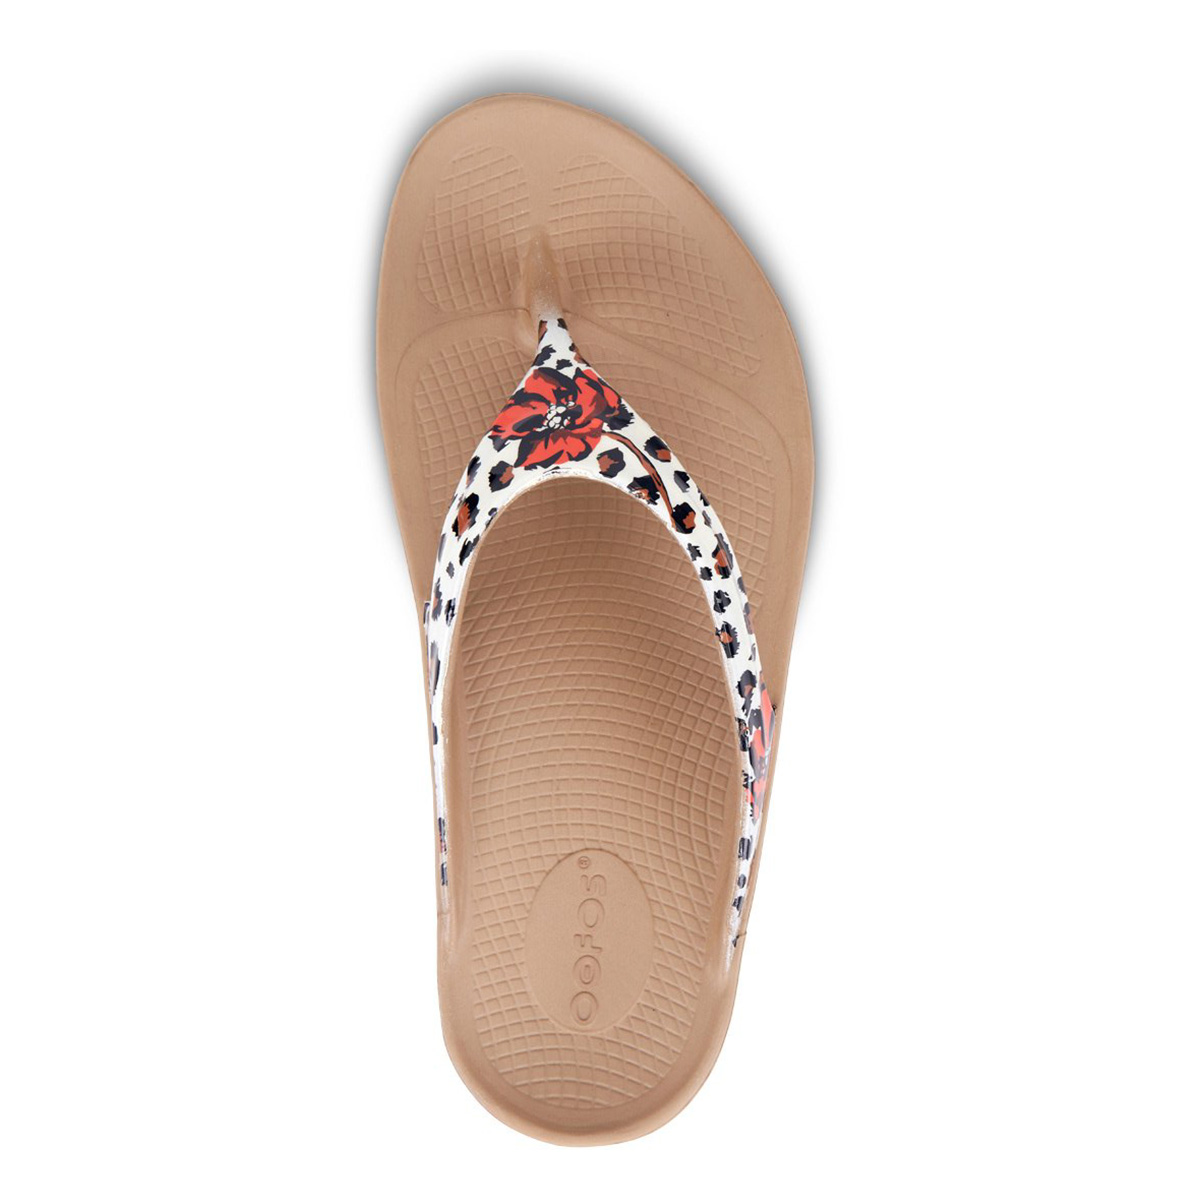 OOFOS Cheetah/Leopard Print Limited Edition OOlala Sandals